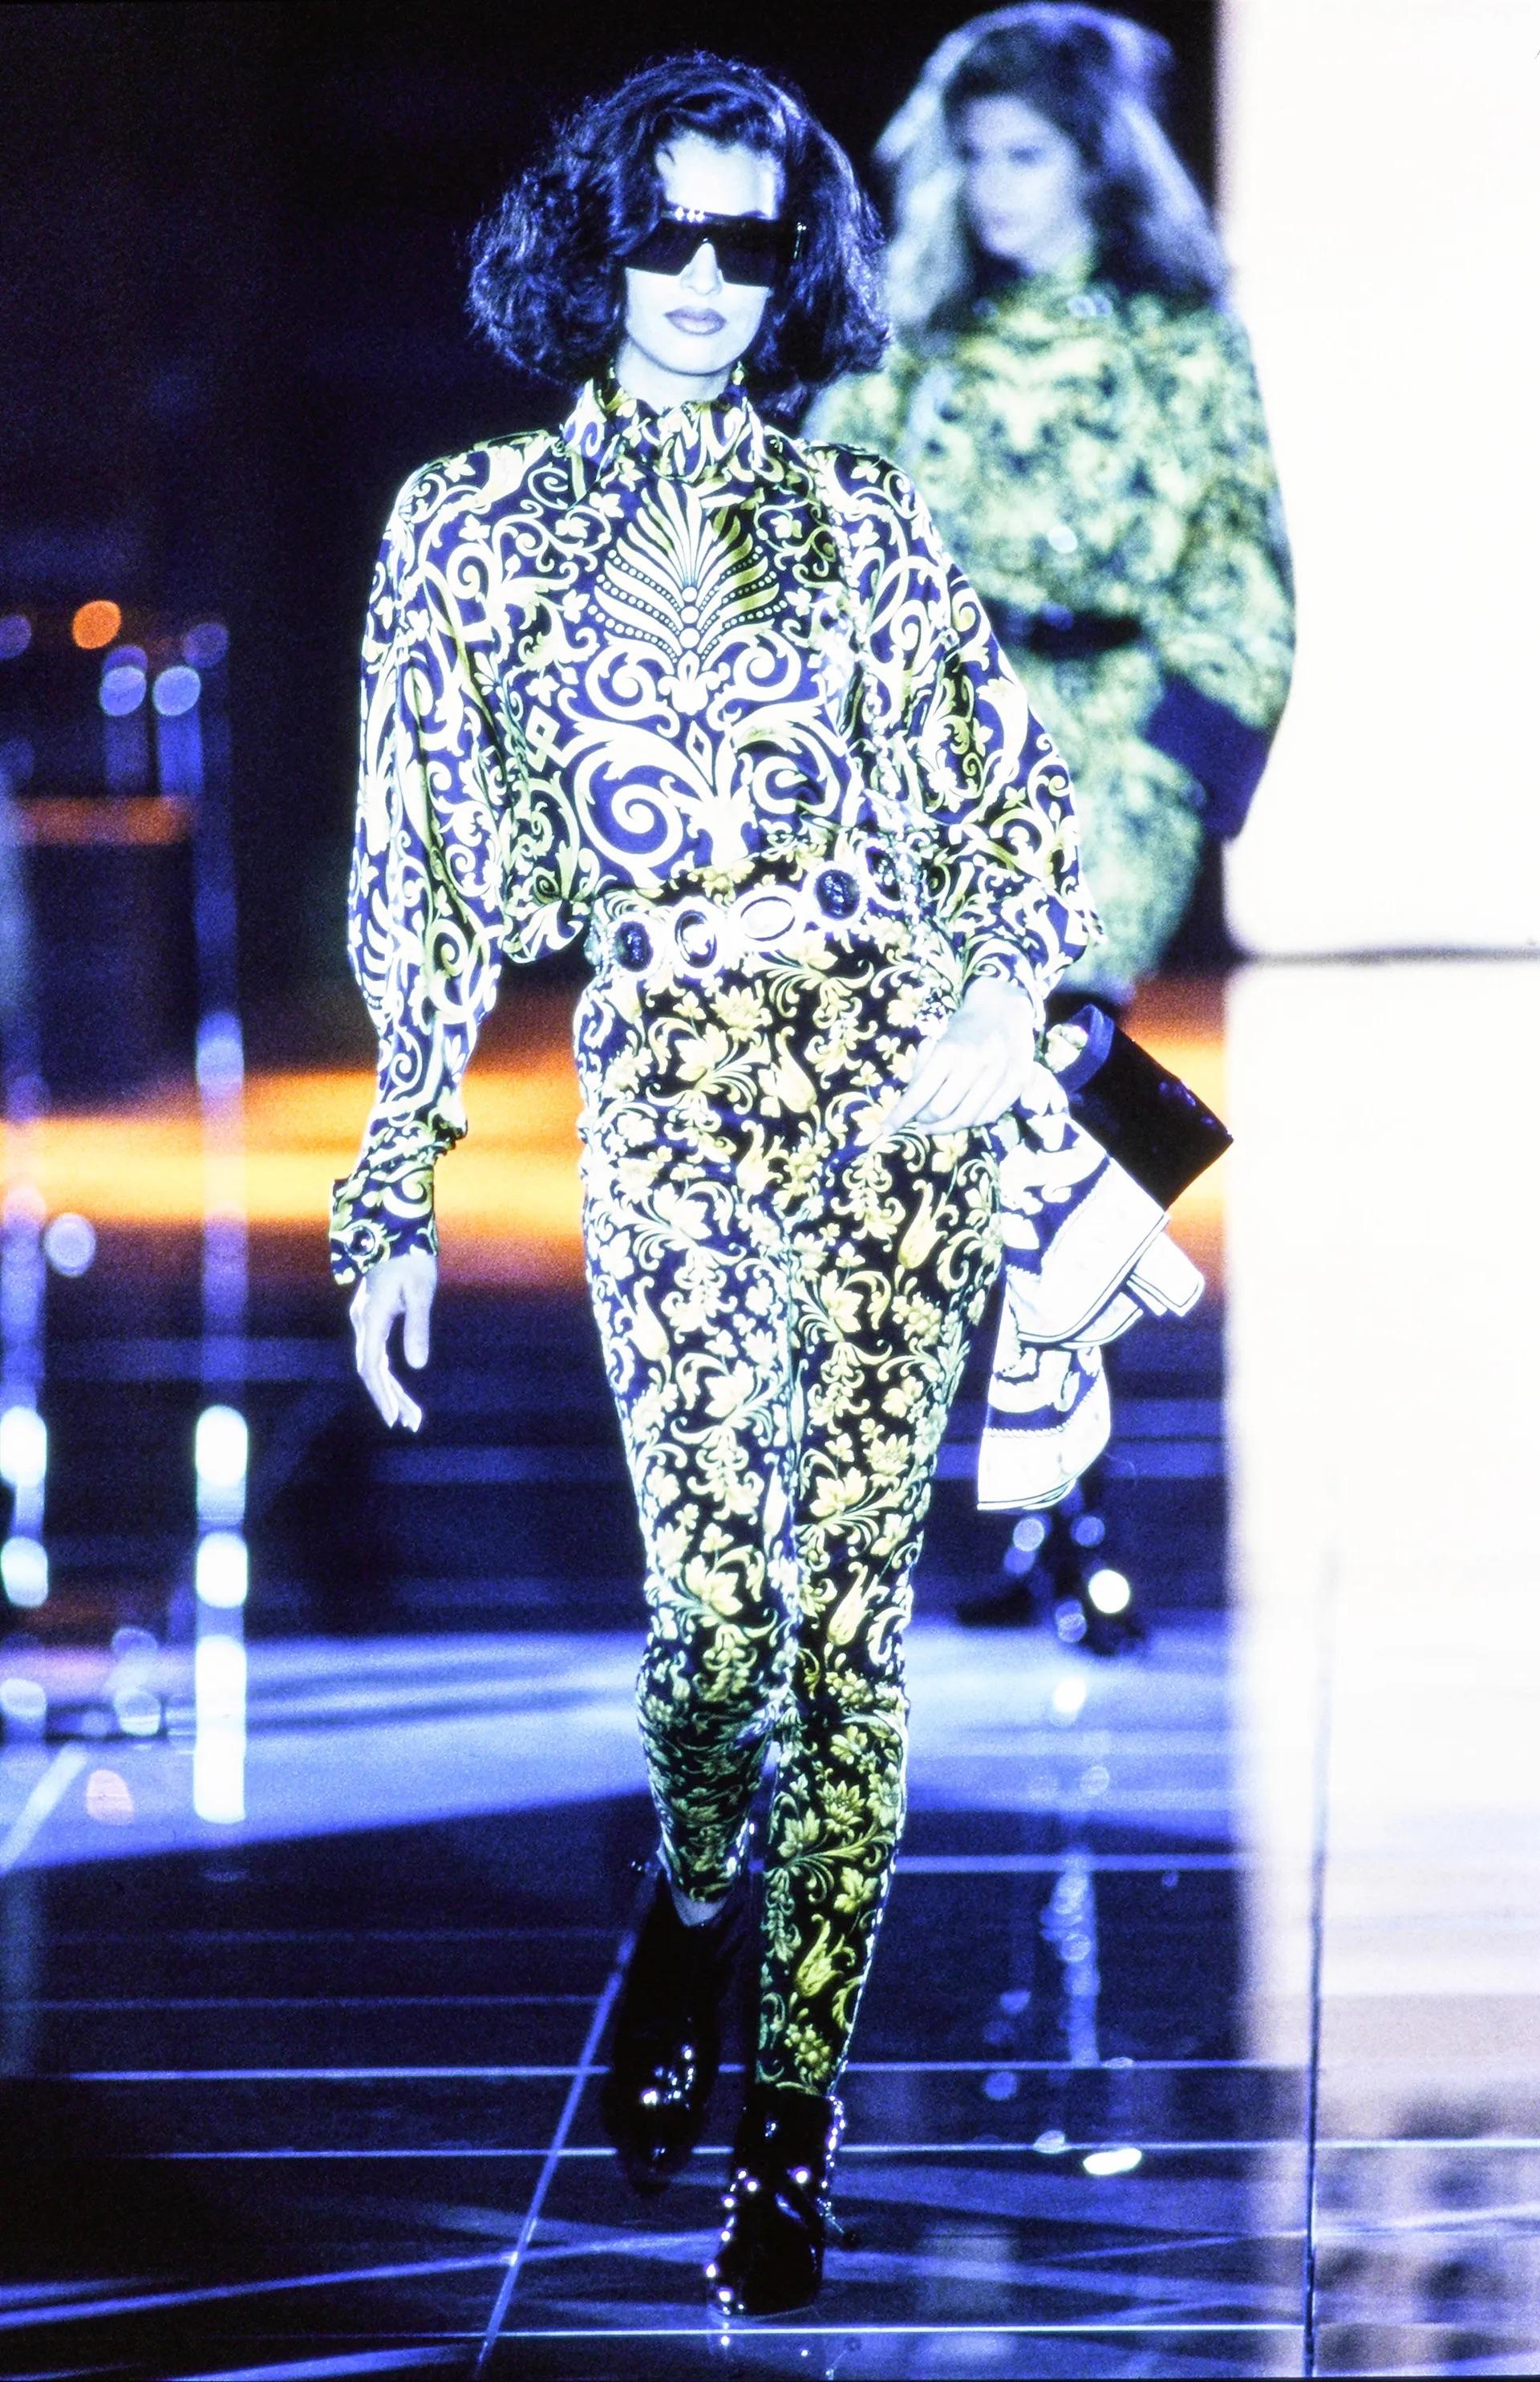 Presenting a fabulous pair of black-yellow-gold baroque print Gianni Versace velvet print, designed by Gianni Versace. From the Fall/Winter 1991 collection, these pants debuted on the season's runway as part of look 65, modeled by Yasmeen Ghauri.